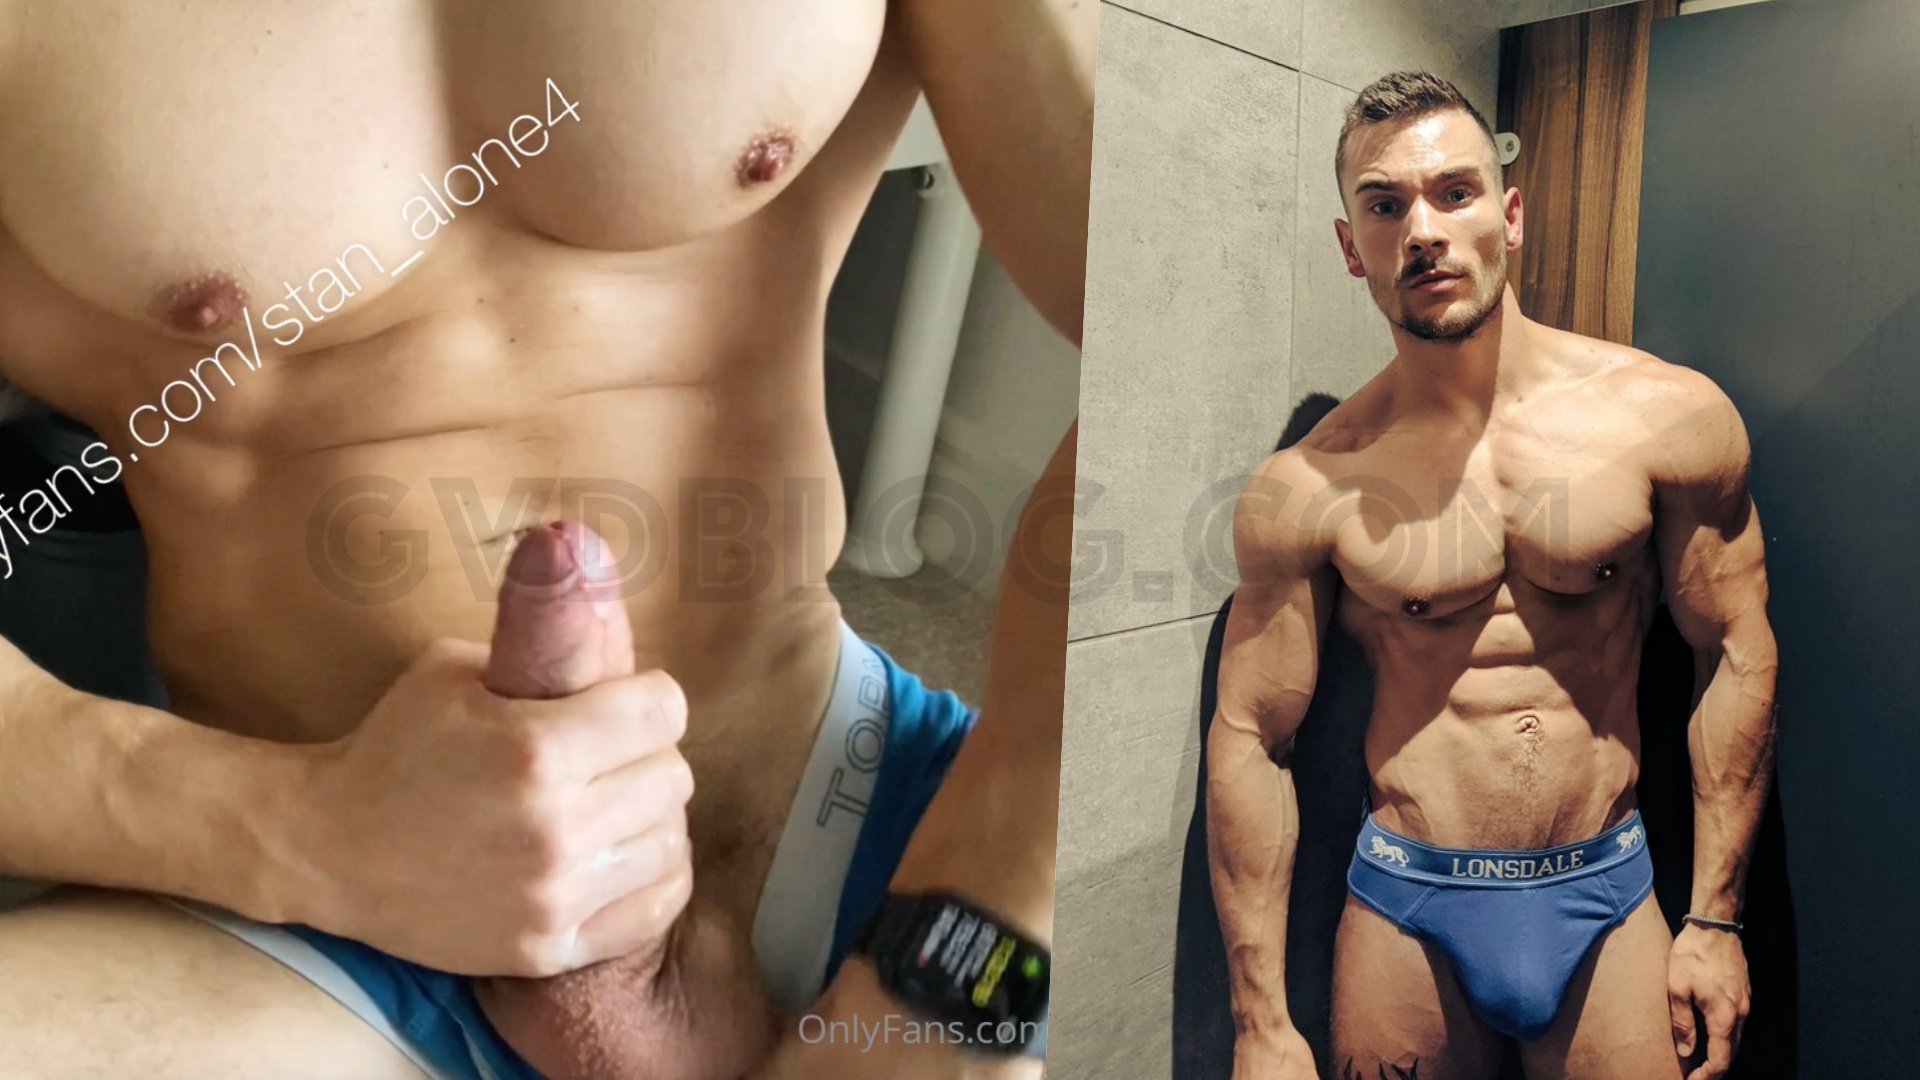 Bearcode89 onlyfans free video gay